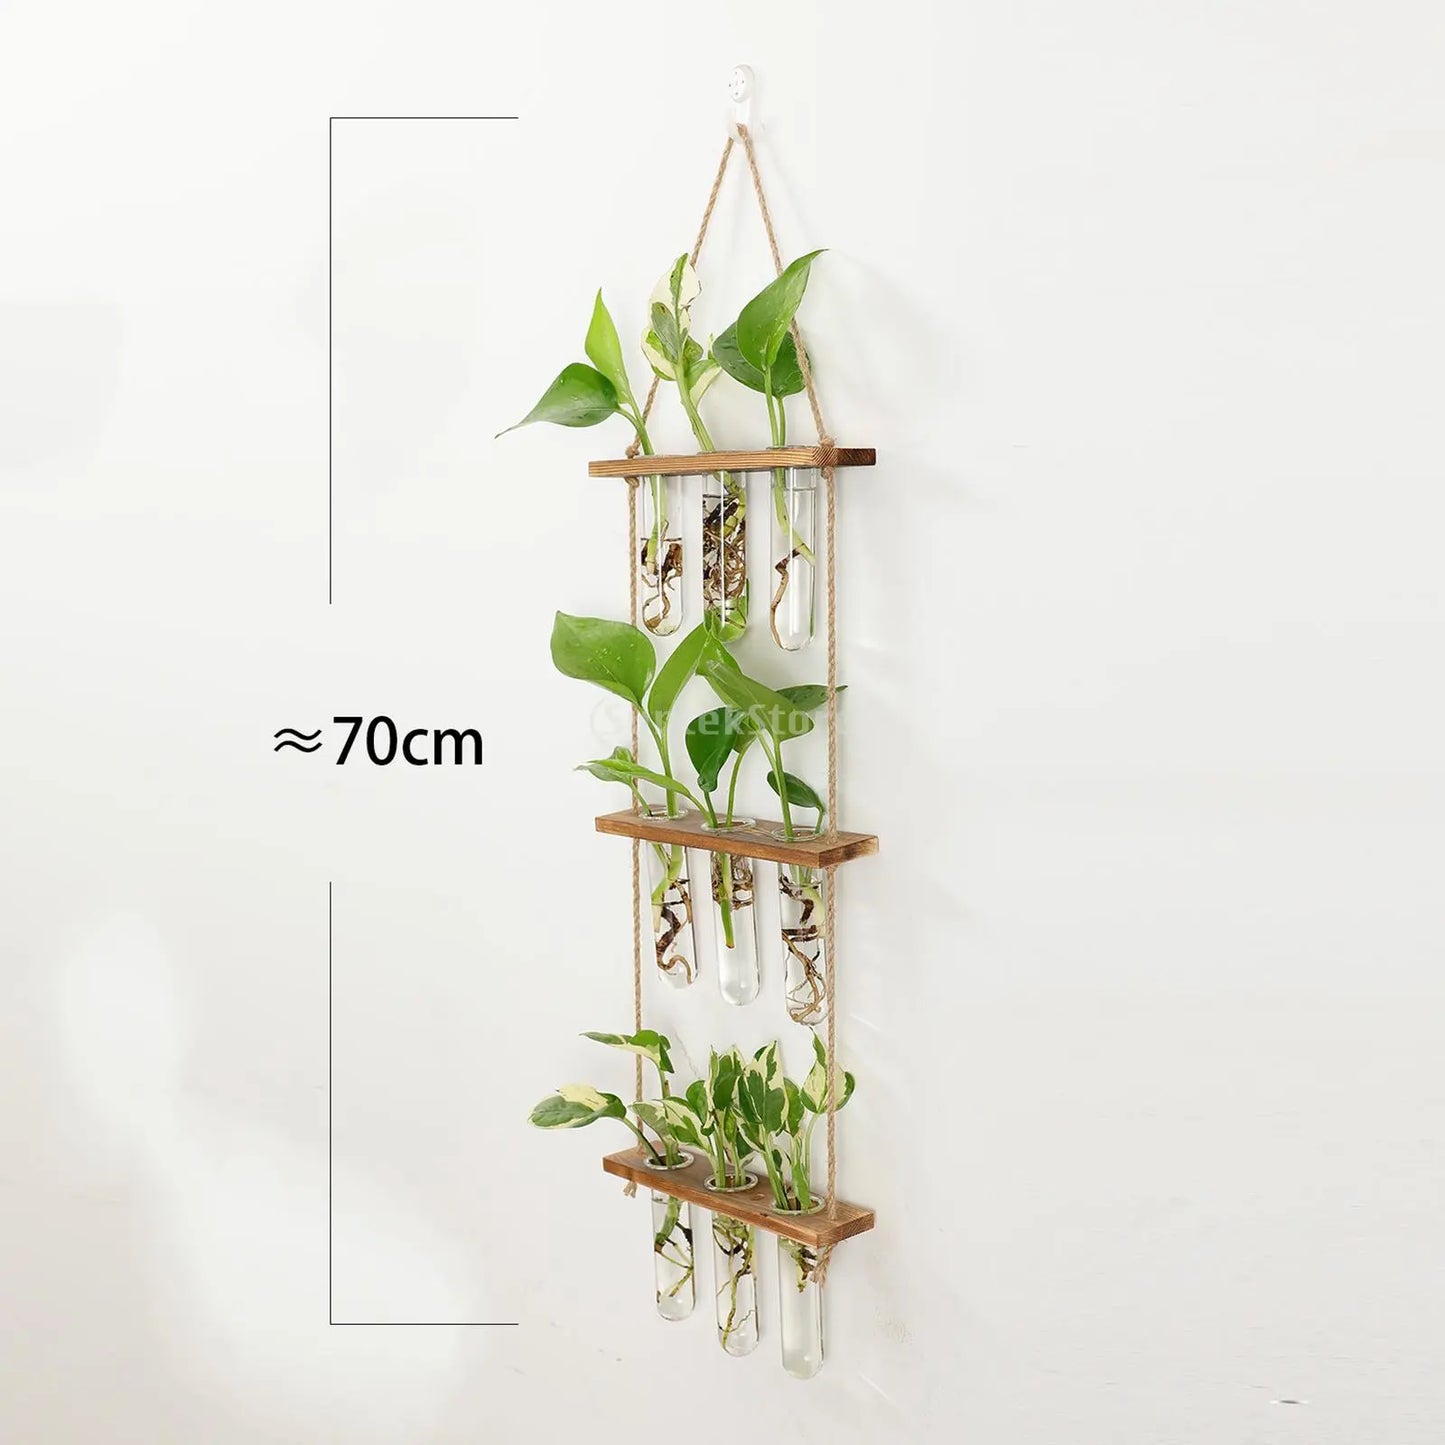 Test Tubes Glass Planter Wall Hanging Terrarium Container Flower Bud Vase with Wooden Holder for Propagation Hydroponic Plant